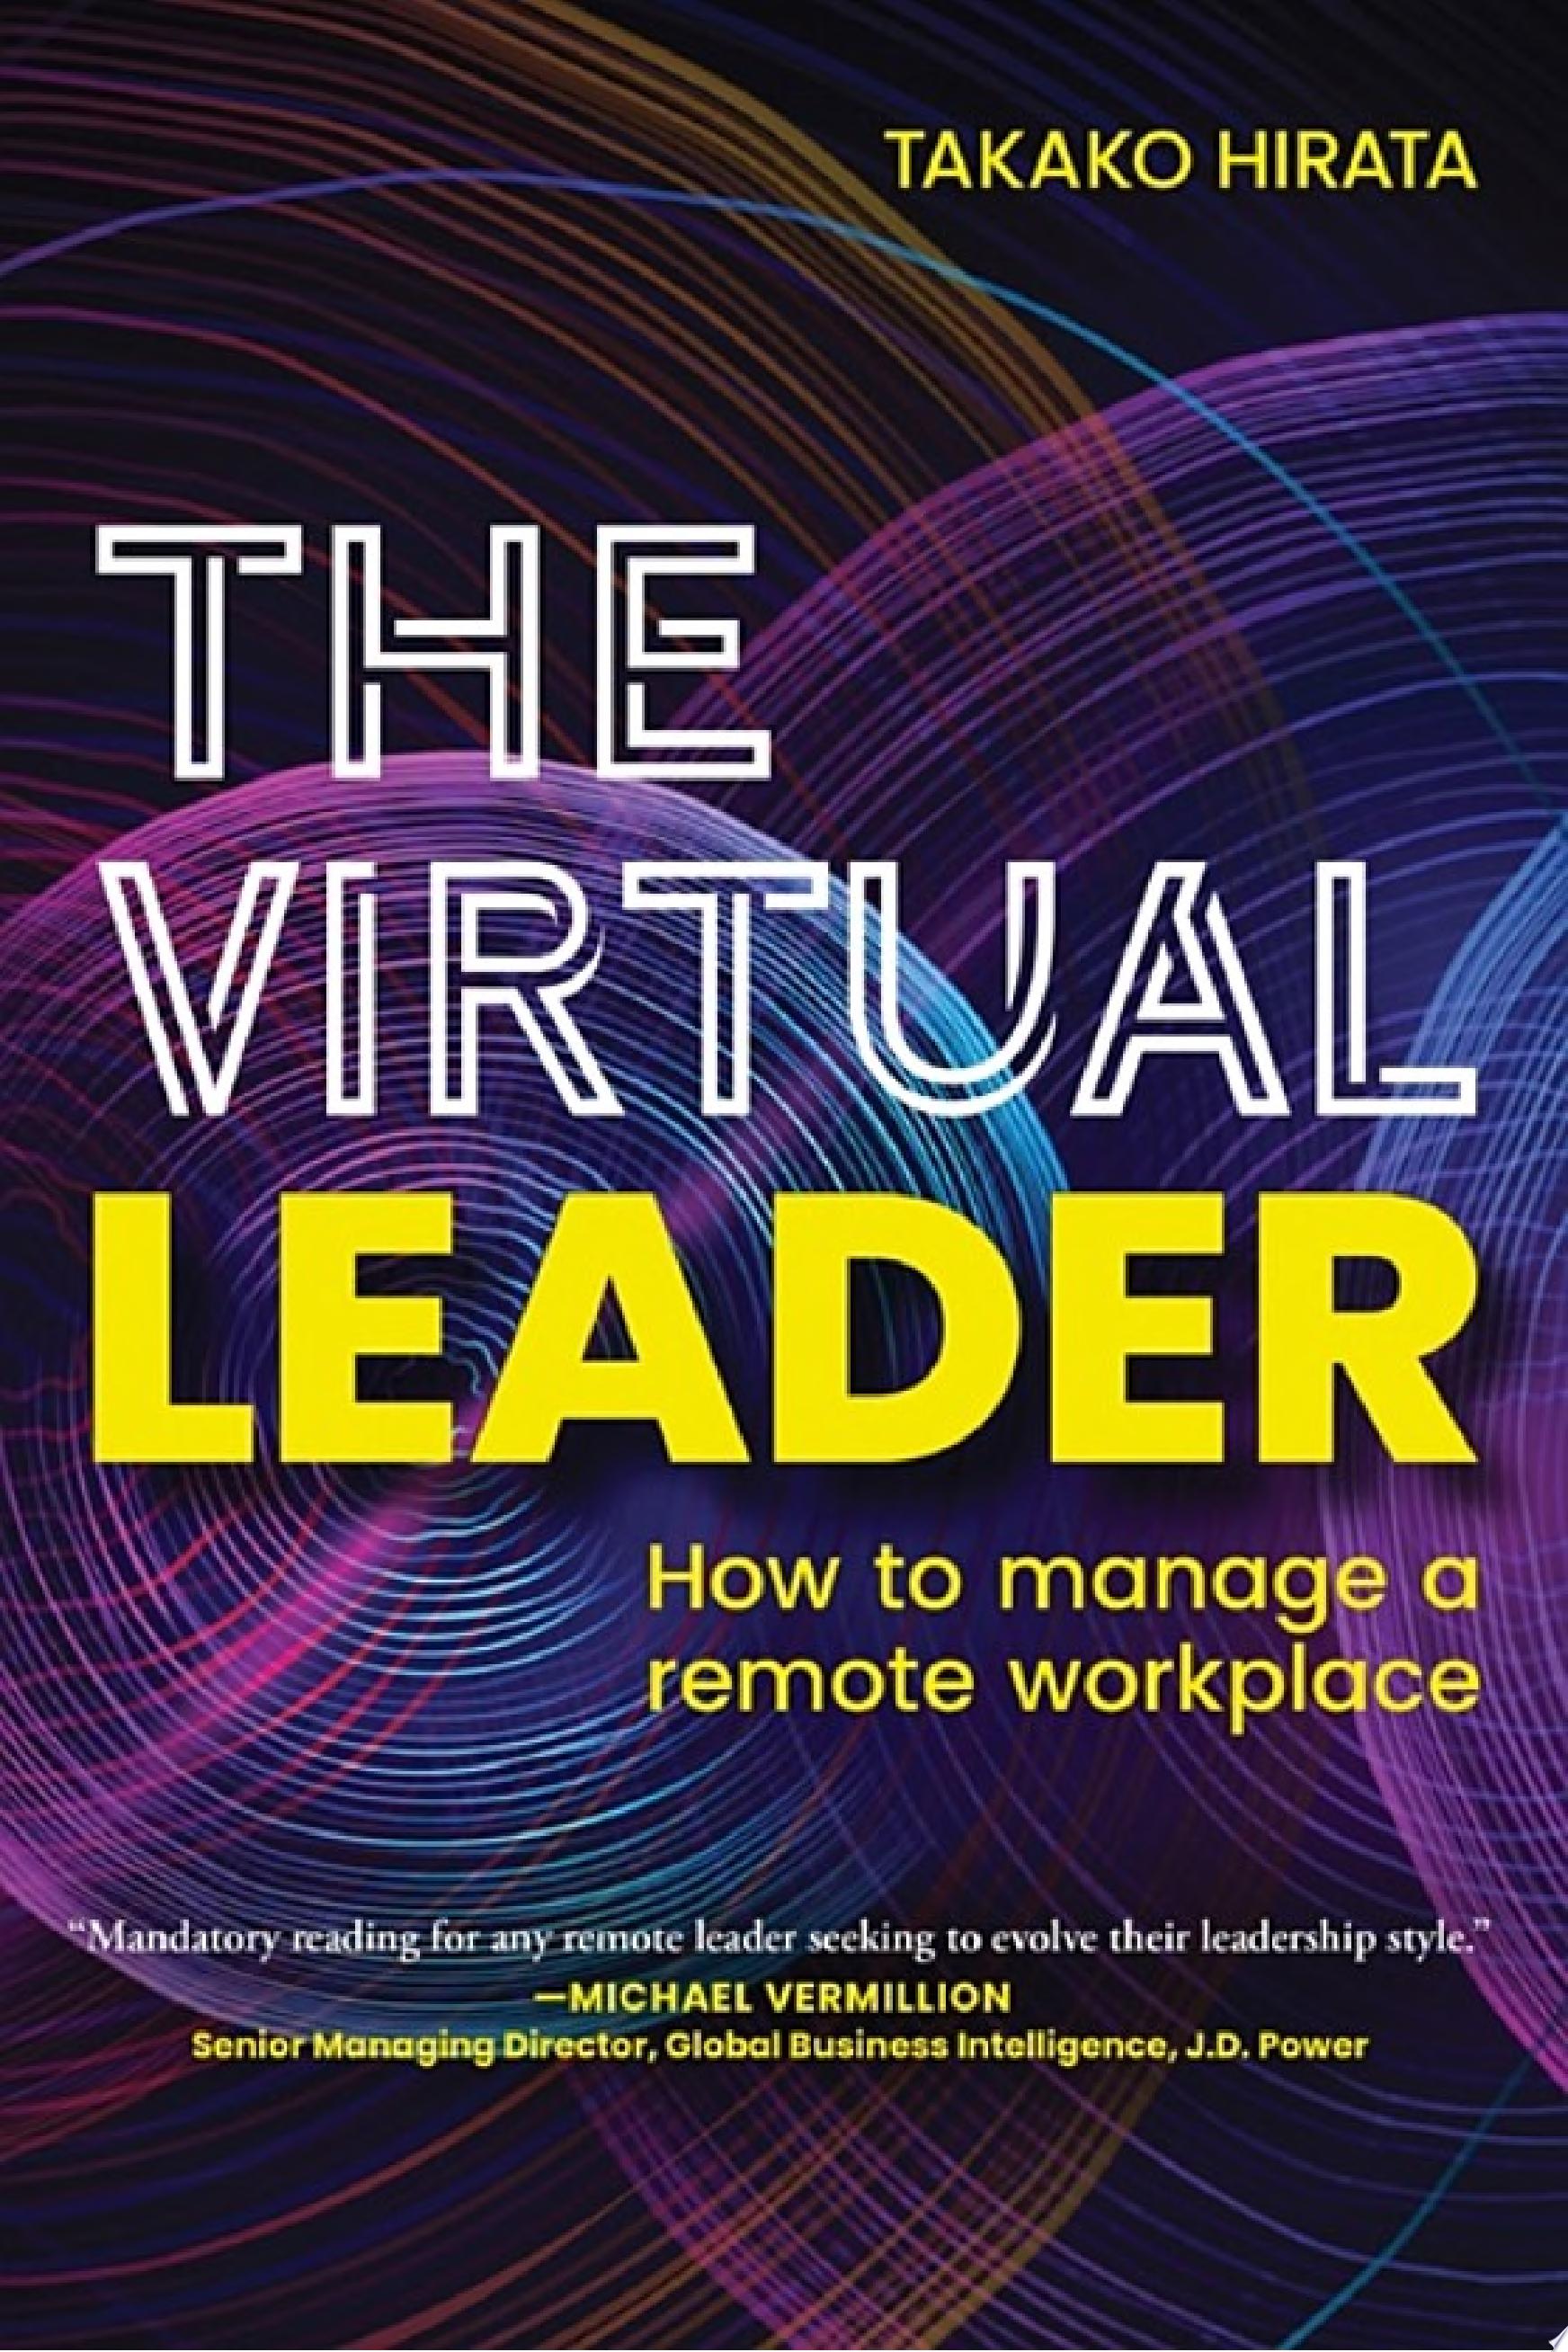 Image for "The Virtual Leader"